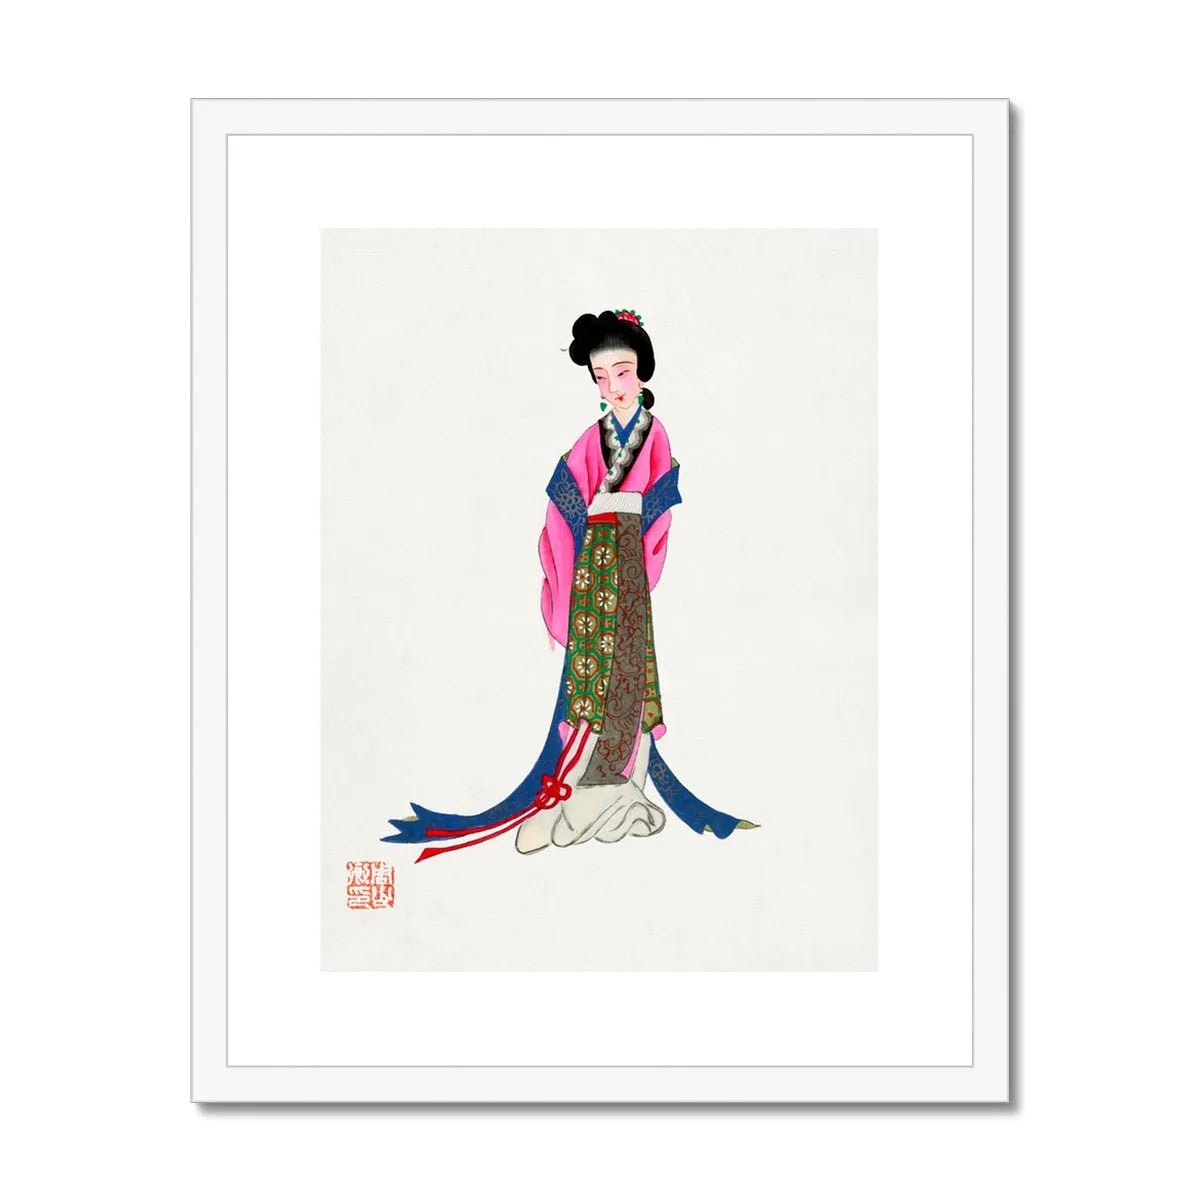 Chinese Noblewoman Framed & Mounted Print - 16’x20’ / White Frame - Posters Prints & Visual Artwork - Aesthetic Art